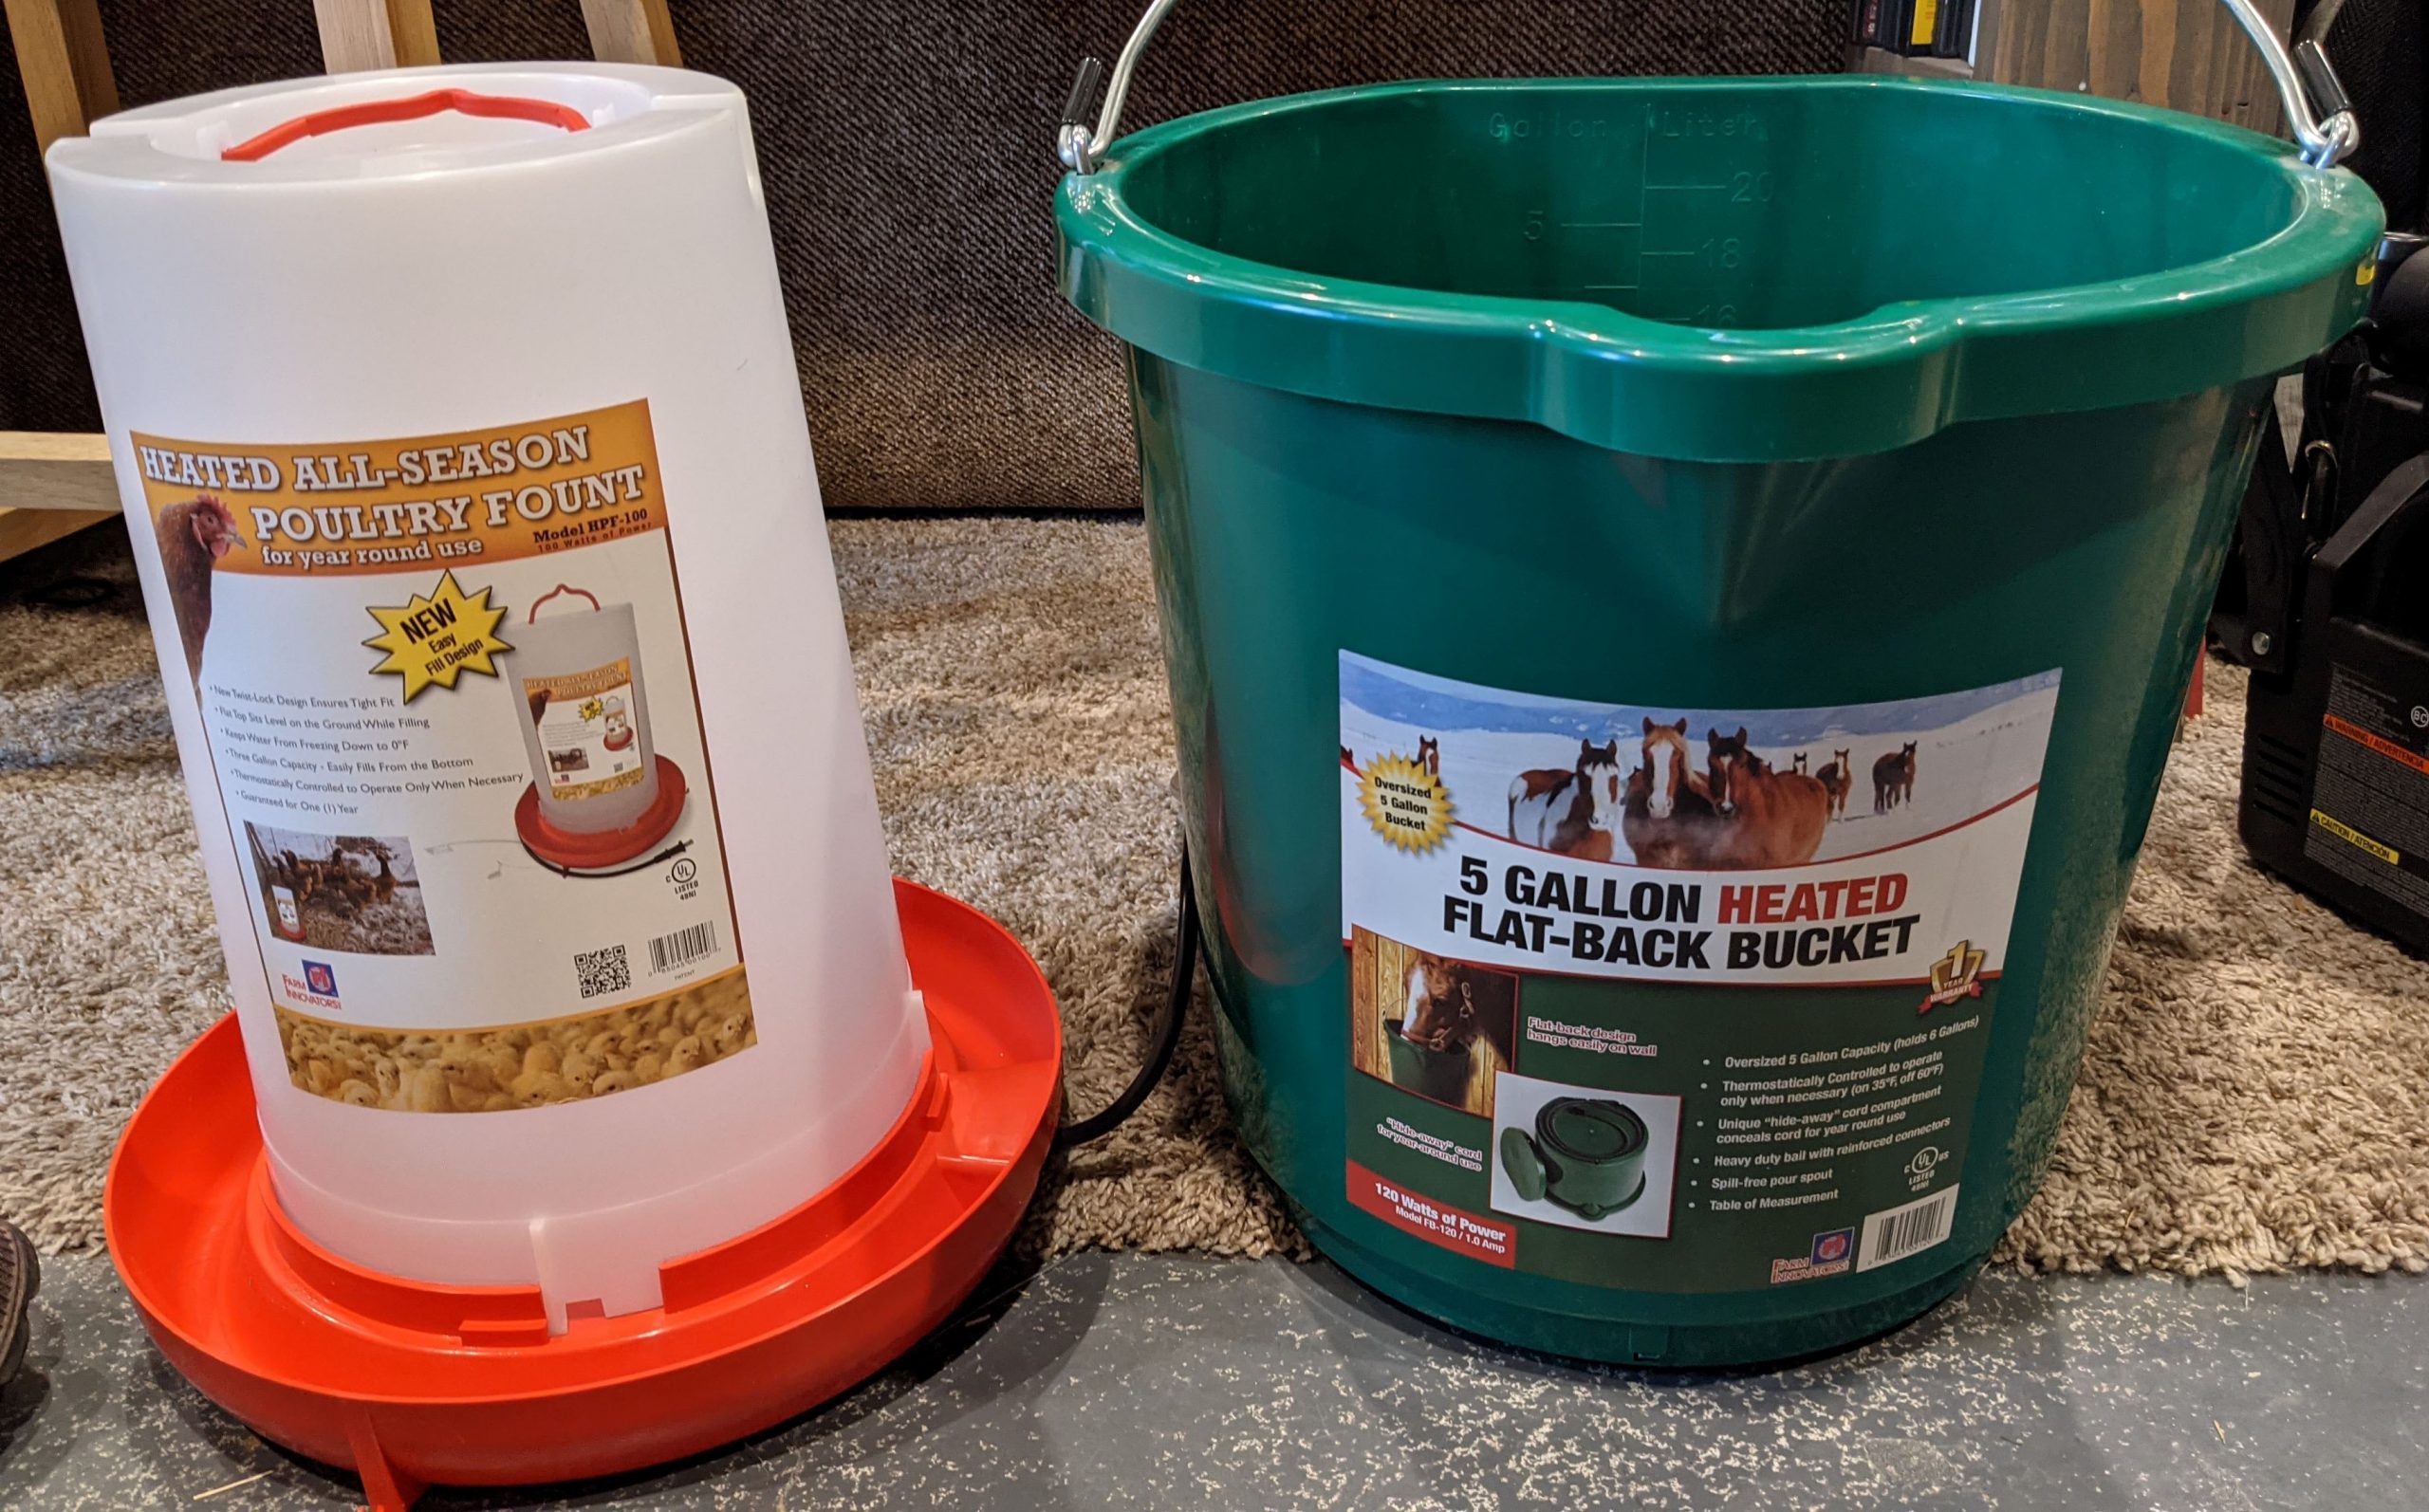 Heated poultry waterer and heated bucket